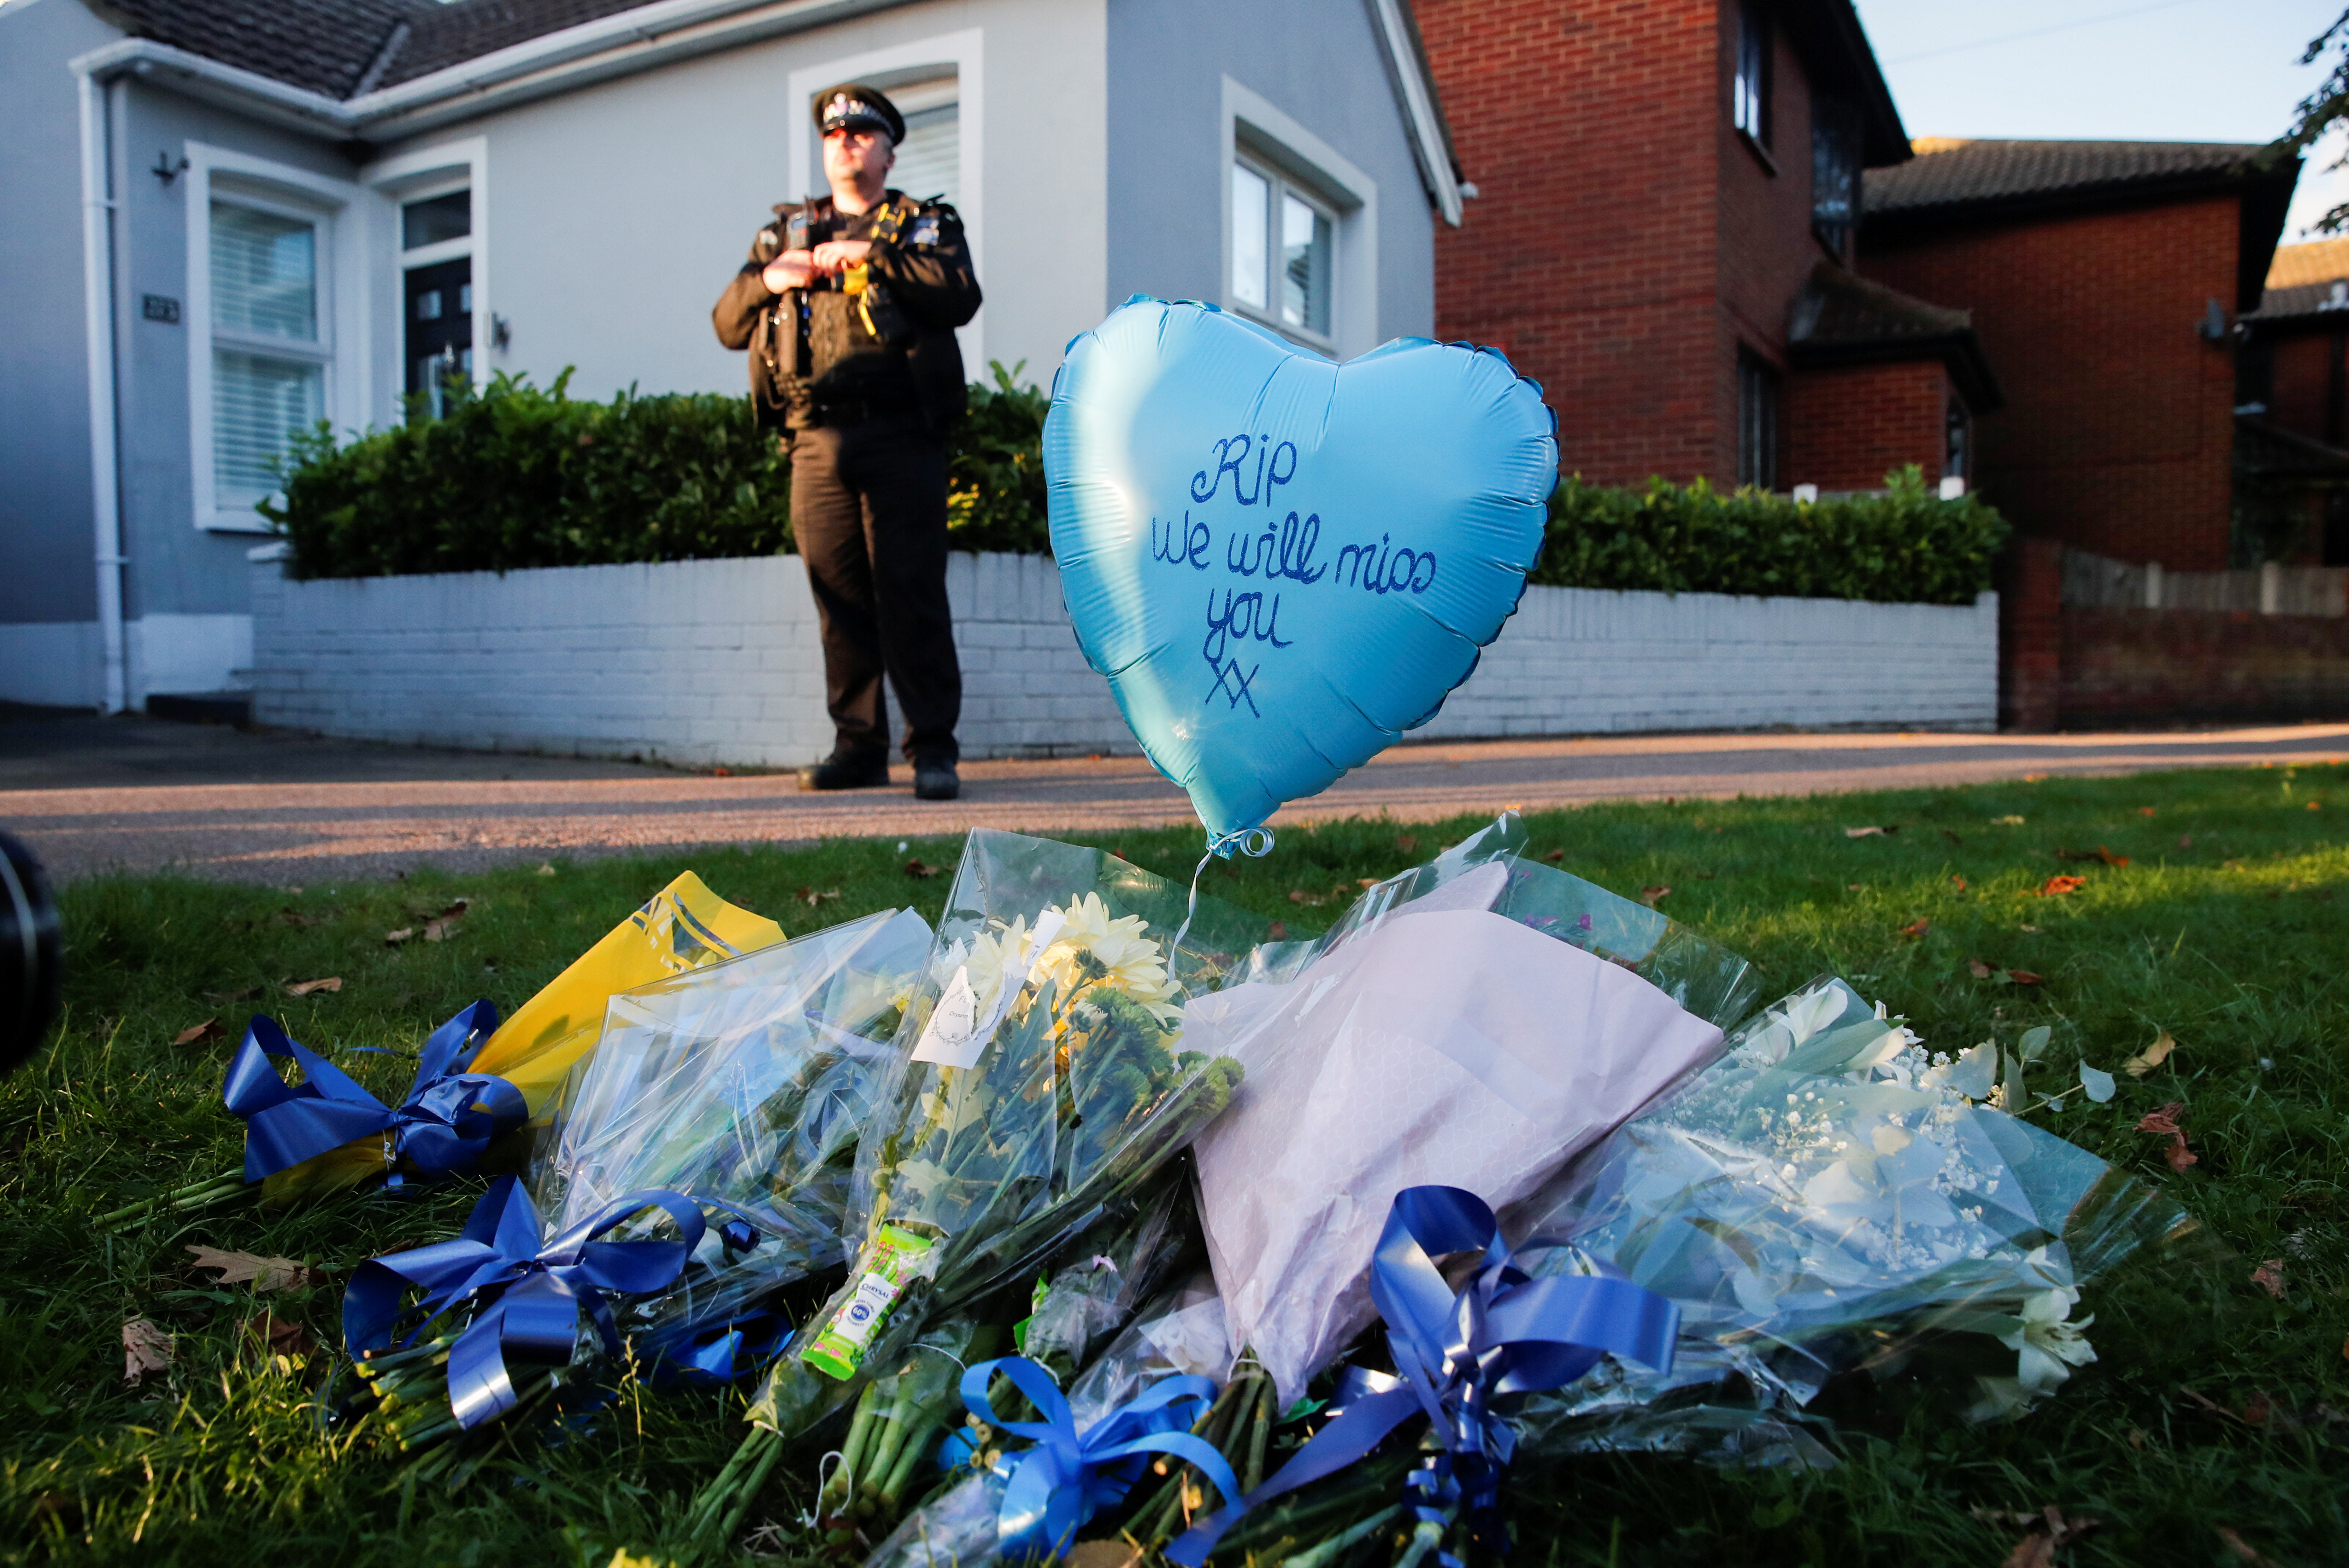 Flowers and a ballon are pictured outside the scene where MP David Amess was stabbed during constituency surgery, in Leigh-on-Sea, Britain October 15, 2021. REUTERS/Andrew Couldridge